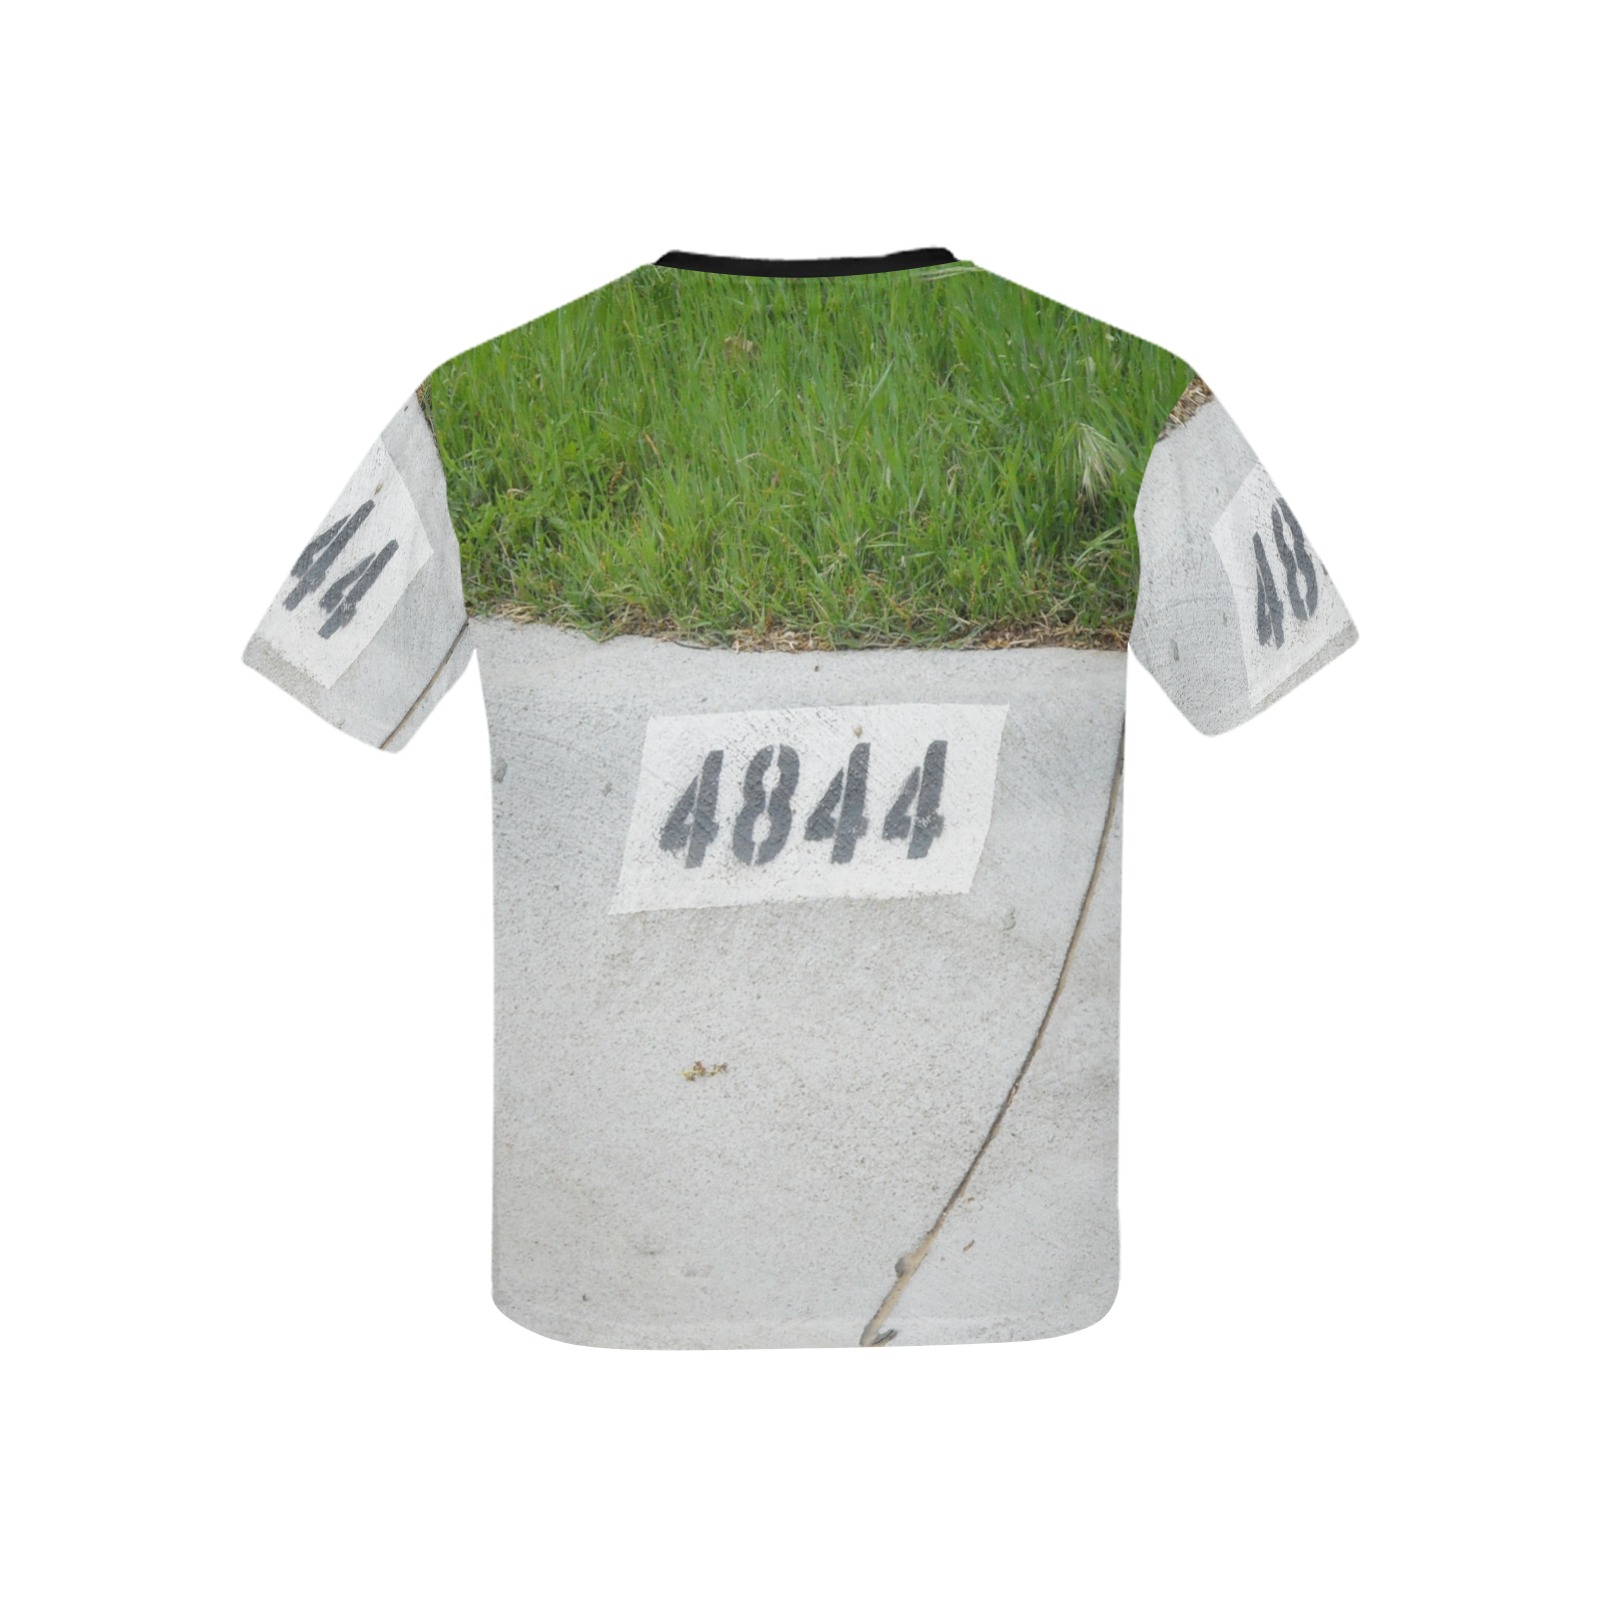 Street Number 4844 with black collar Kids' Mesh Cloth T-Shirt with Solid Color Neck (Model T40)